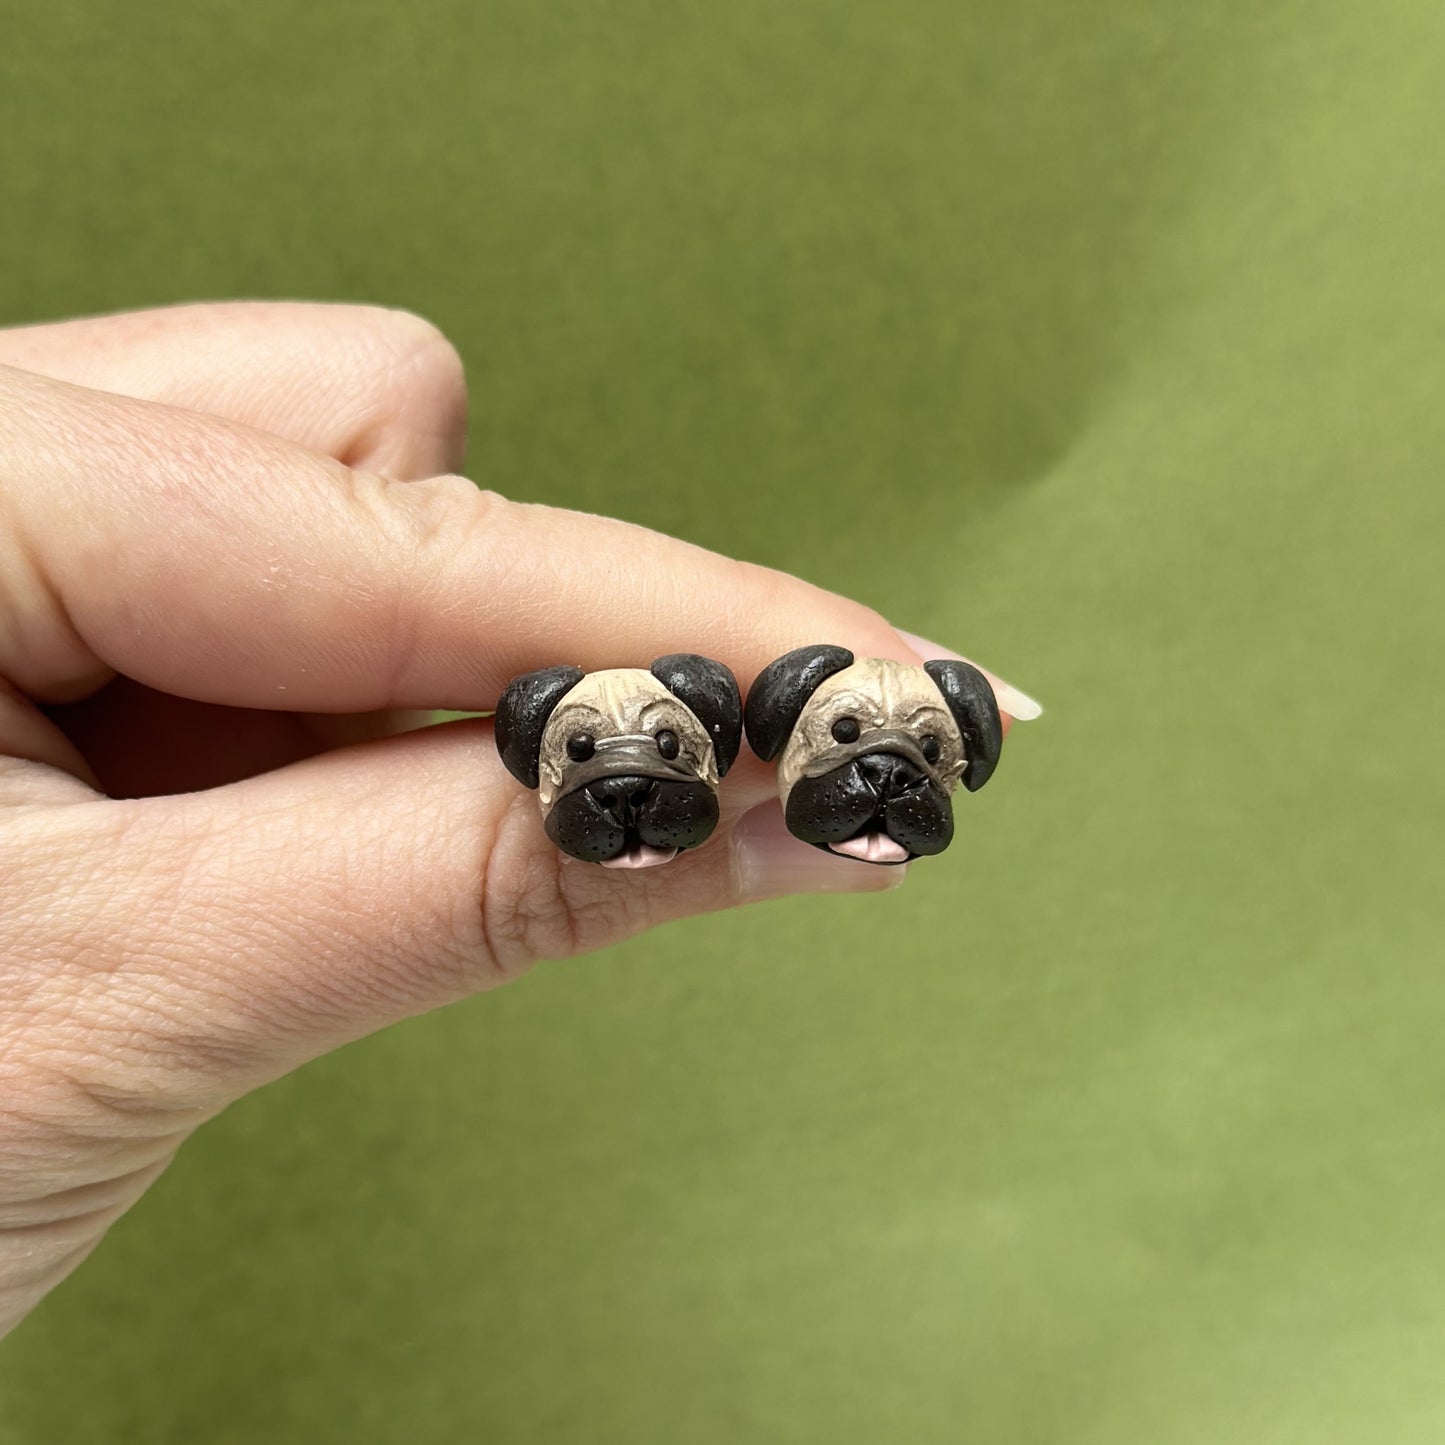 Handmade Pug stud earrings by Pawfect Love, positioned in front of green background